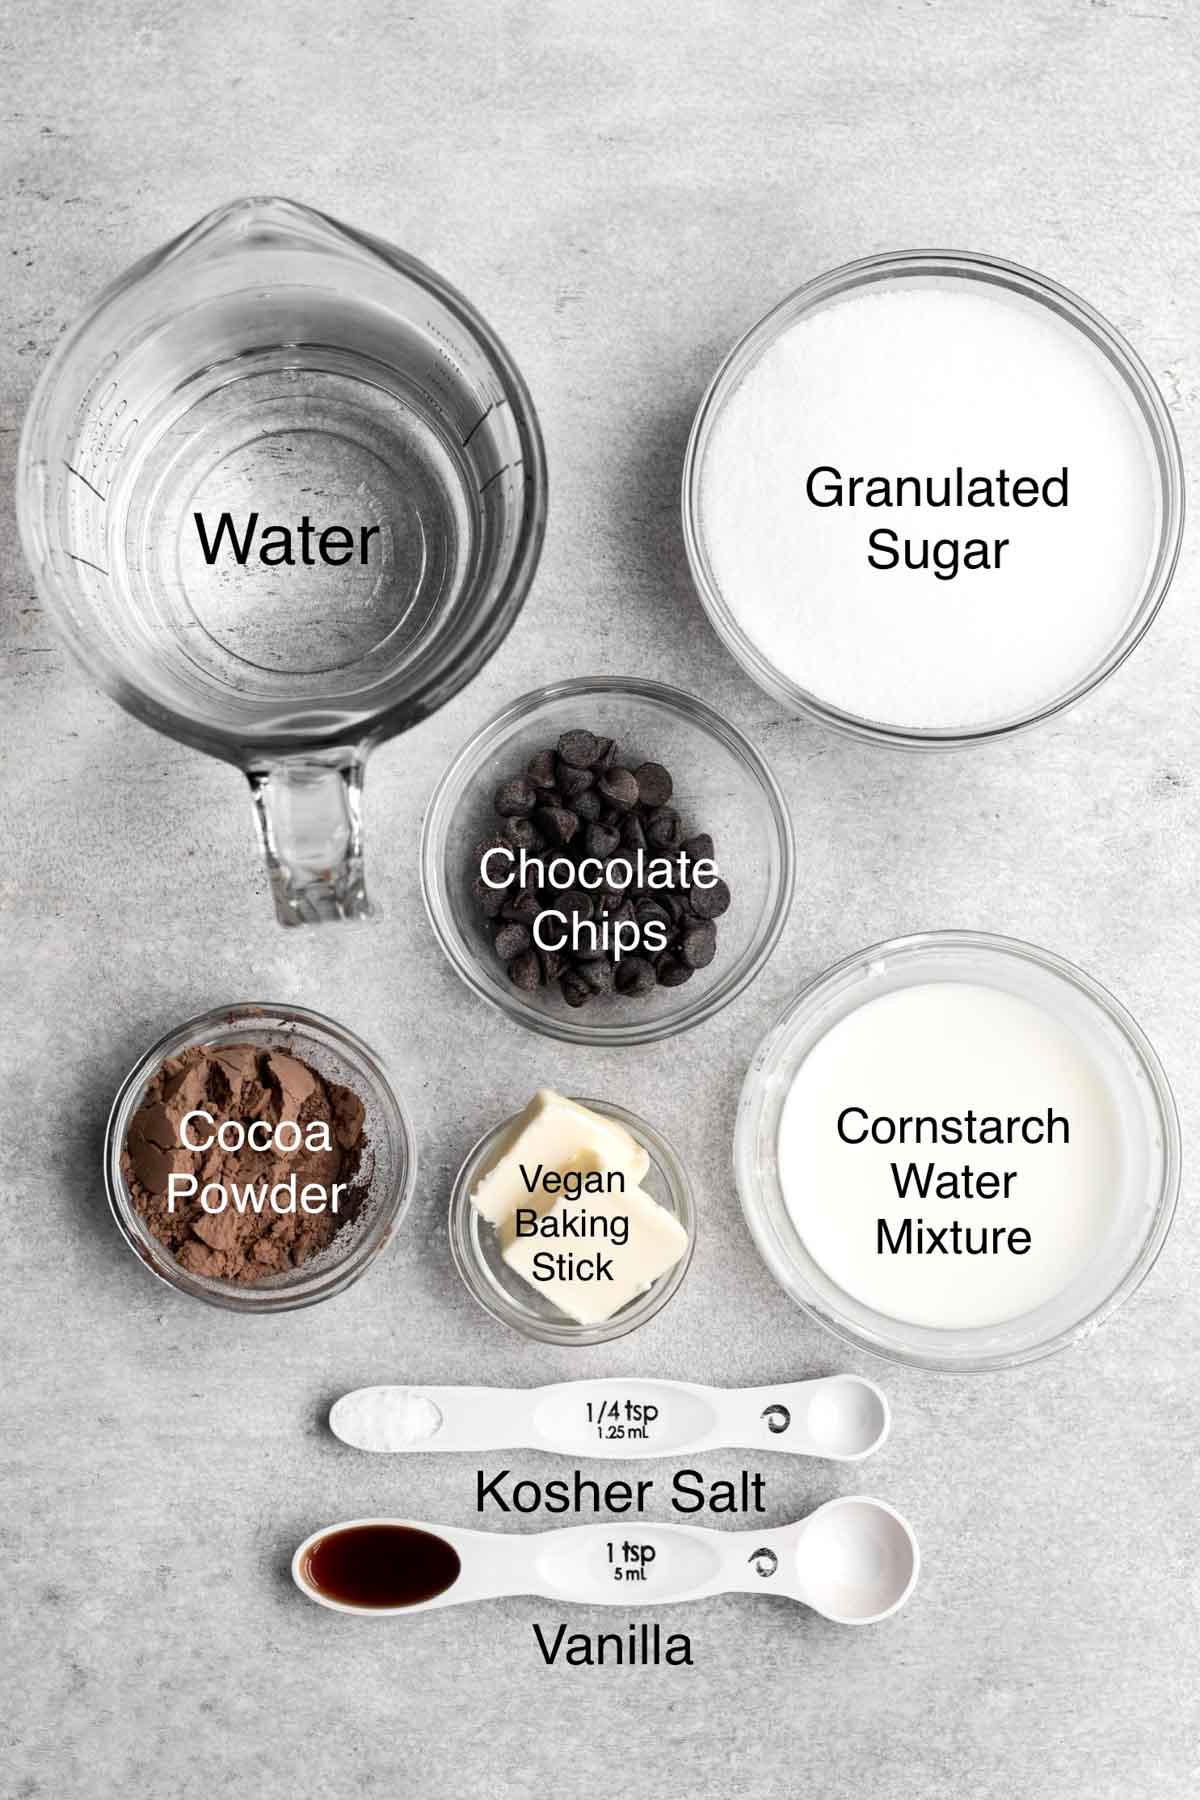 The ingredients of the pudding in separate containers.